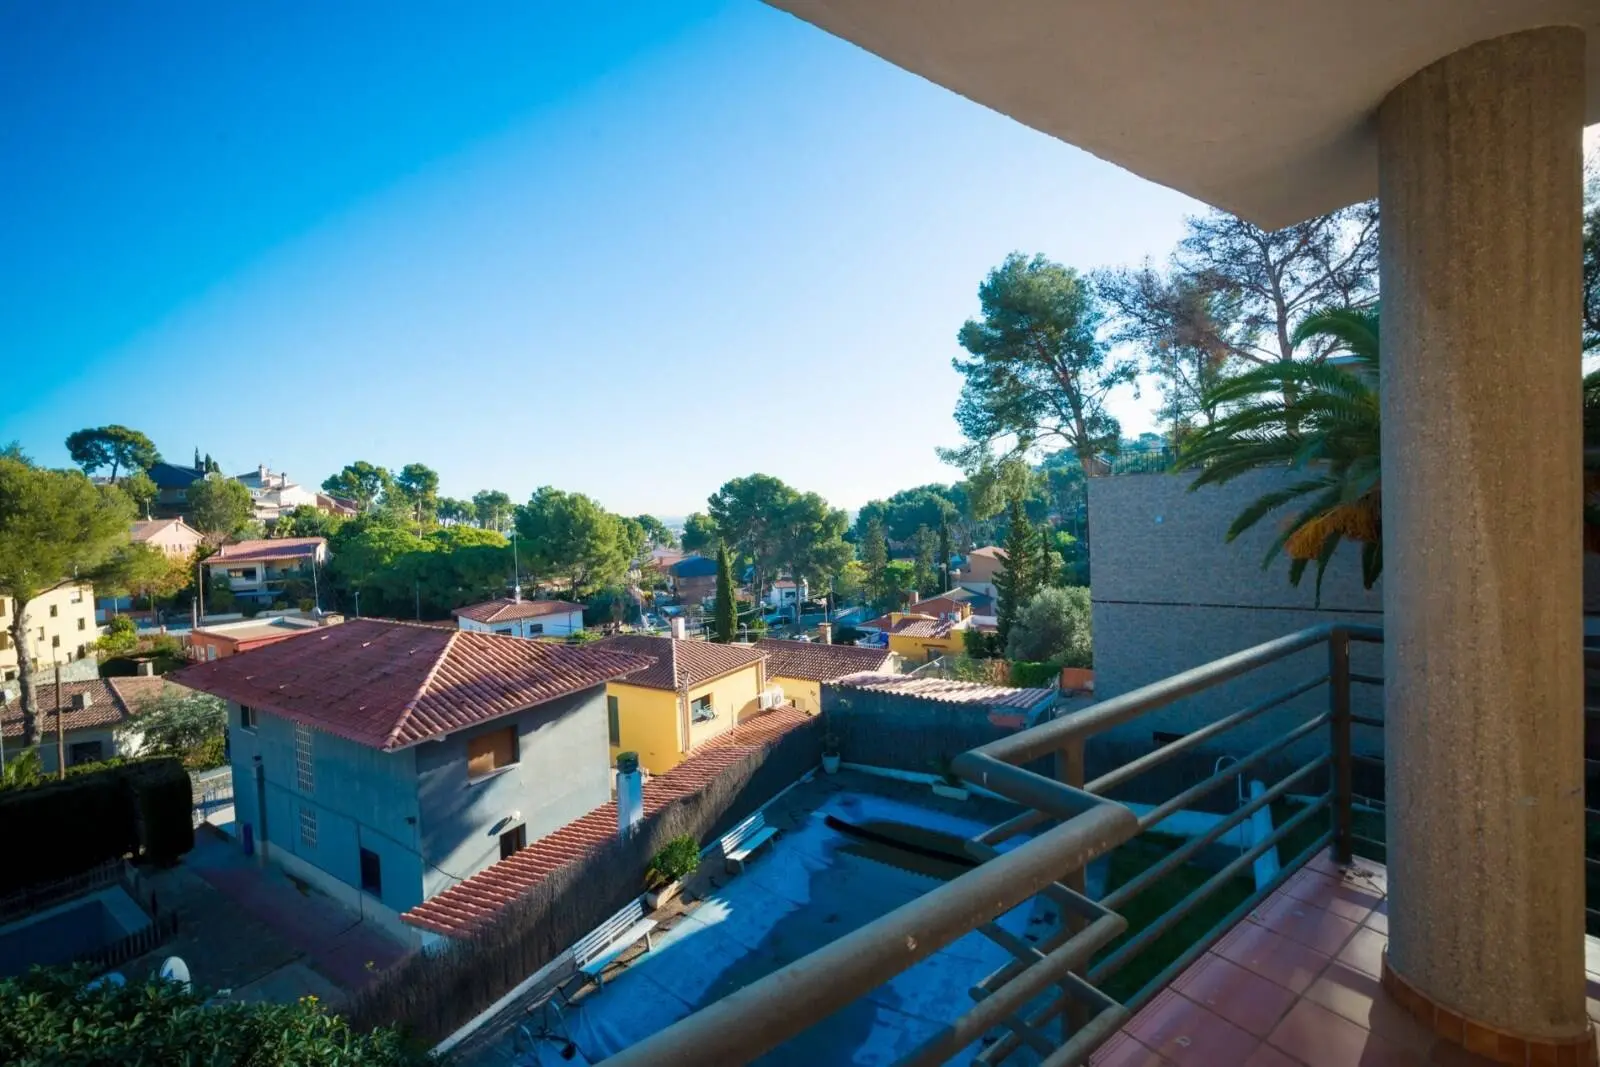 House for sale with a swimming pool in Castelldefels, Barcelona. 2